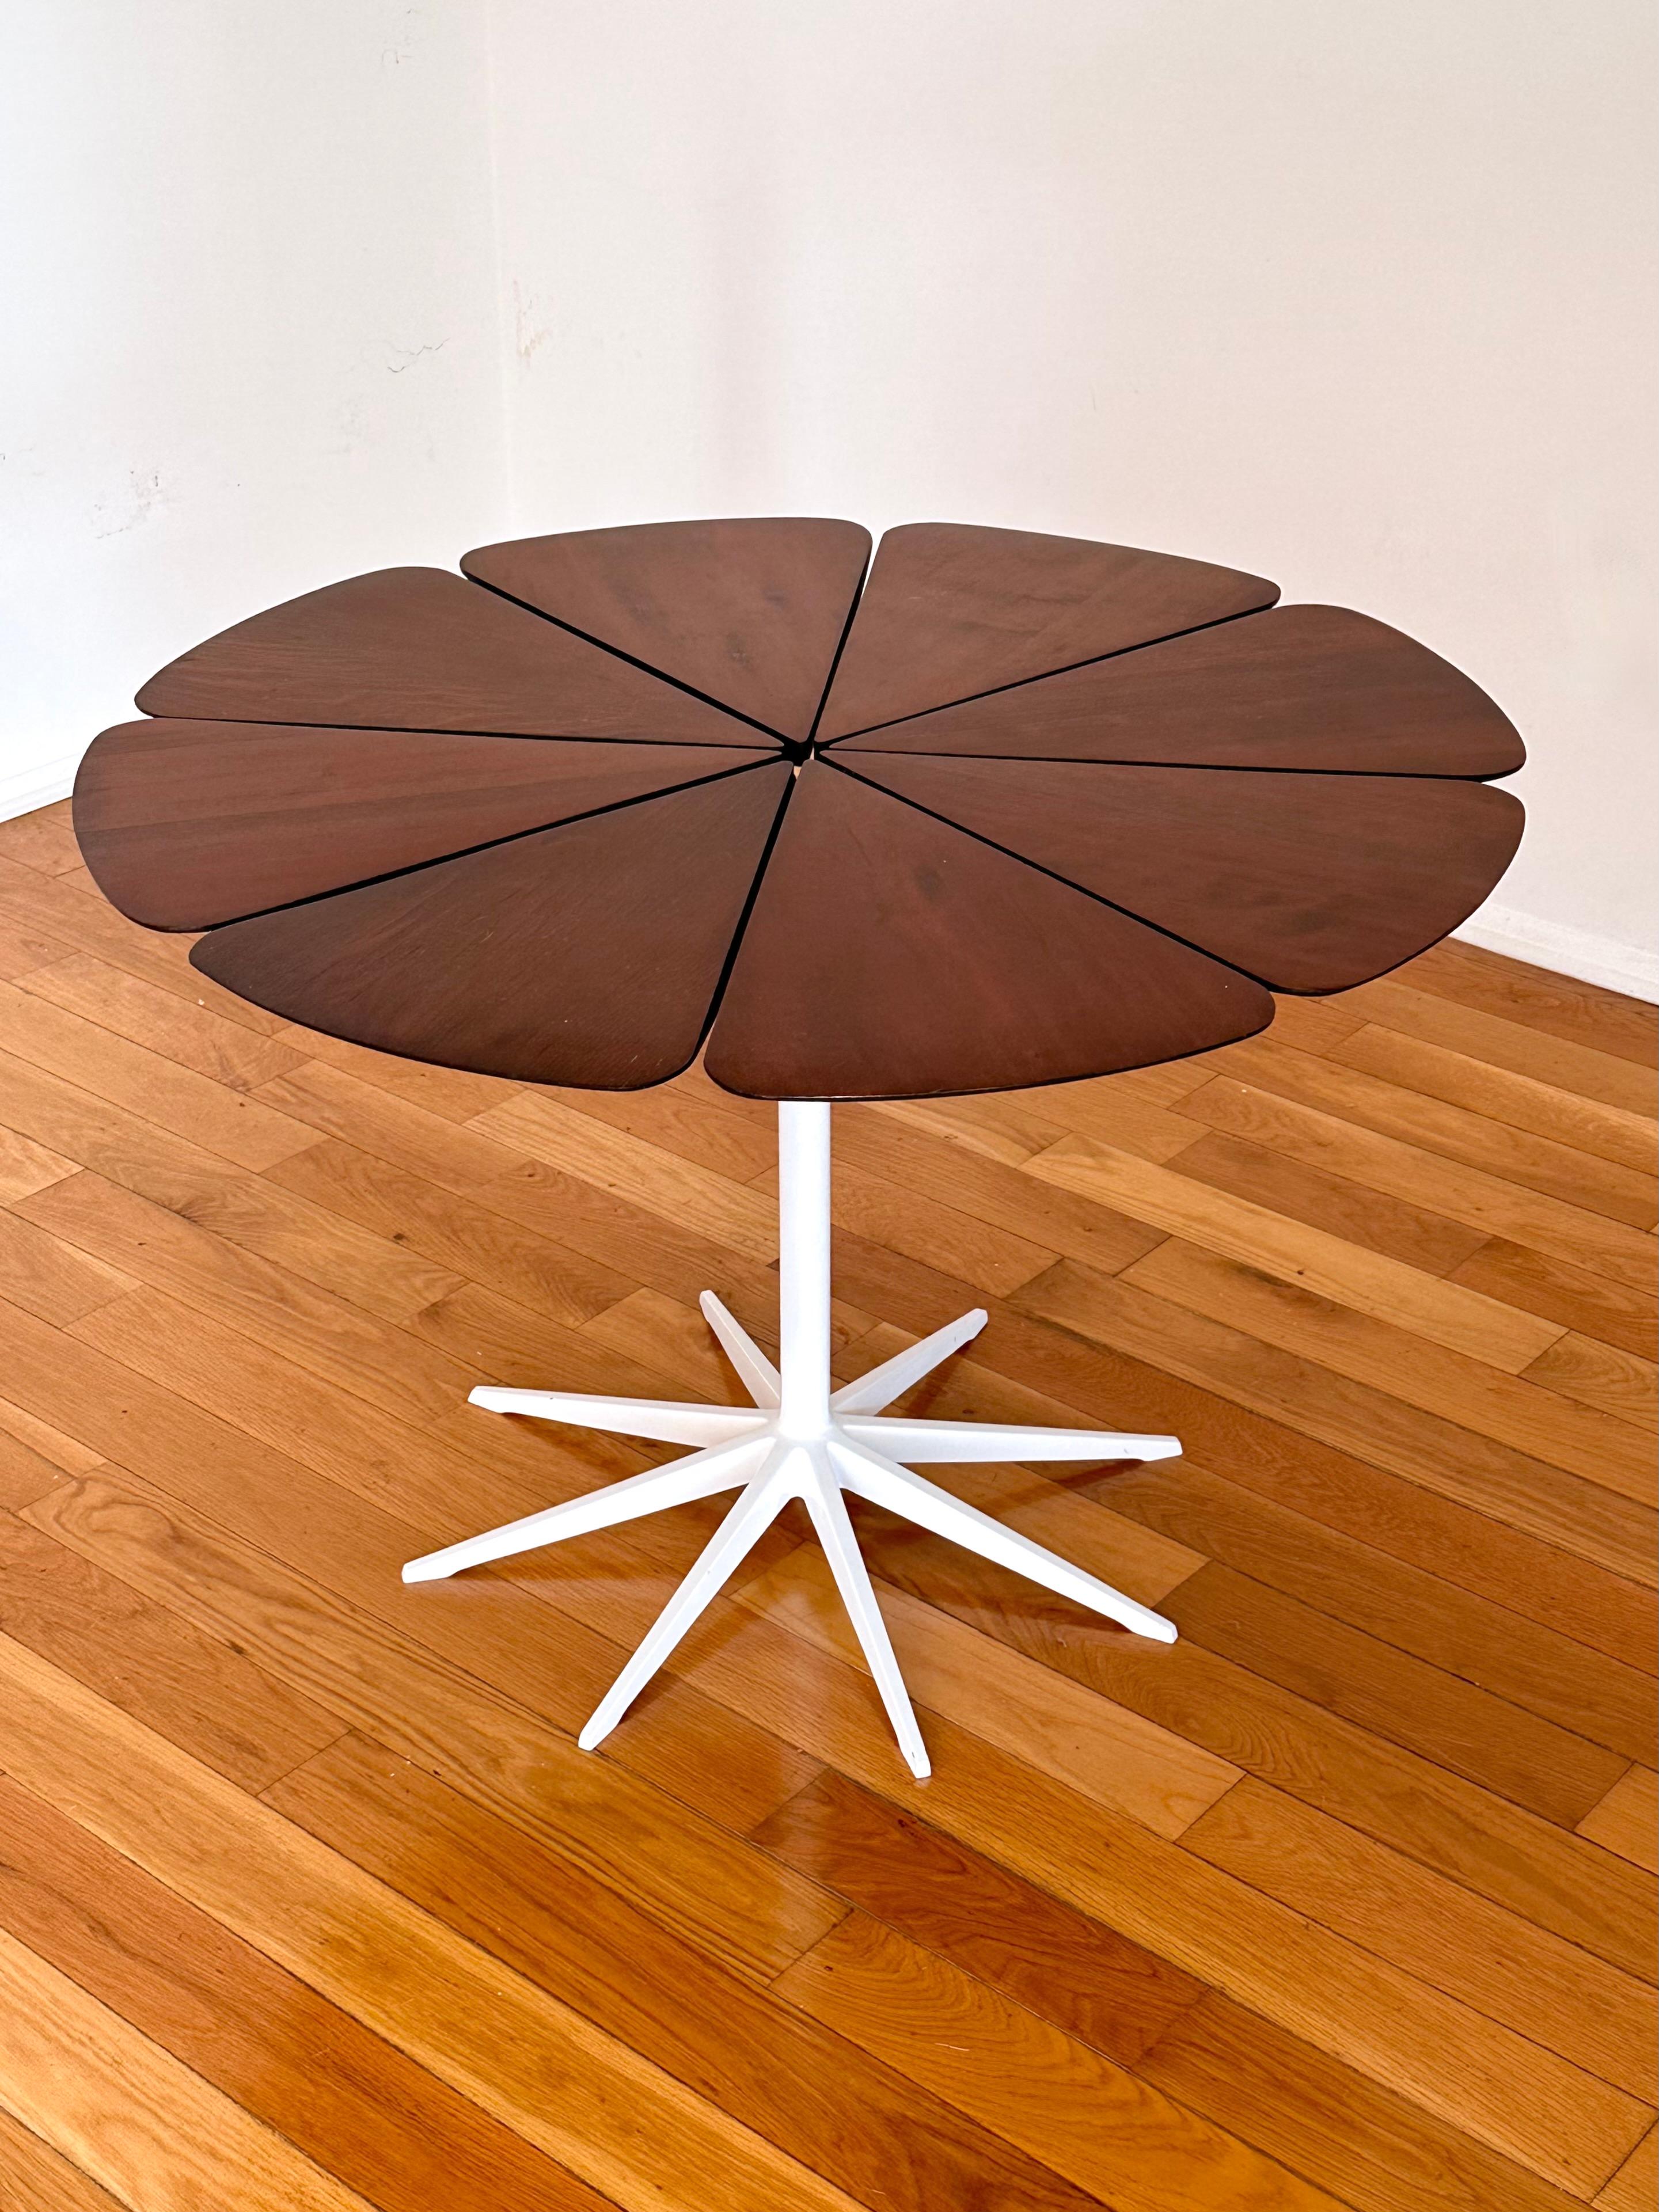 A 42 inch round Petal dining table designed by Richard Schultz for Knoll circa 1960s

Eight redwood petals on a white enameled cast iron star base

42